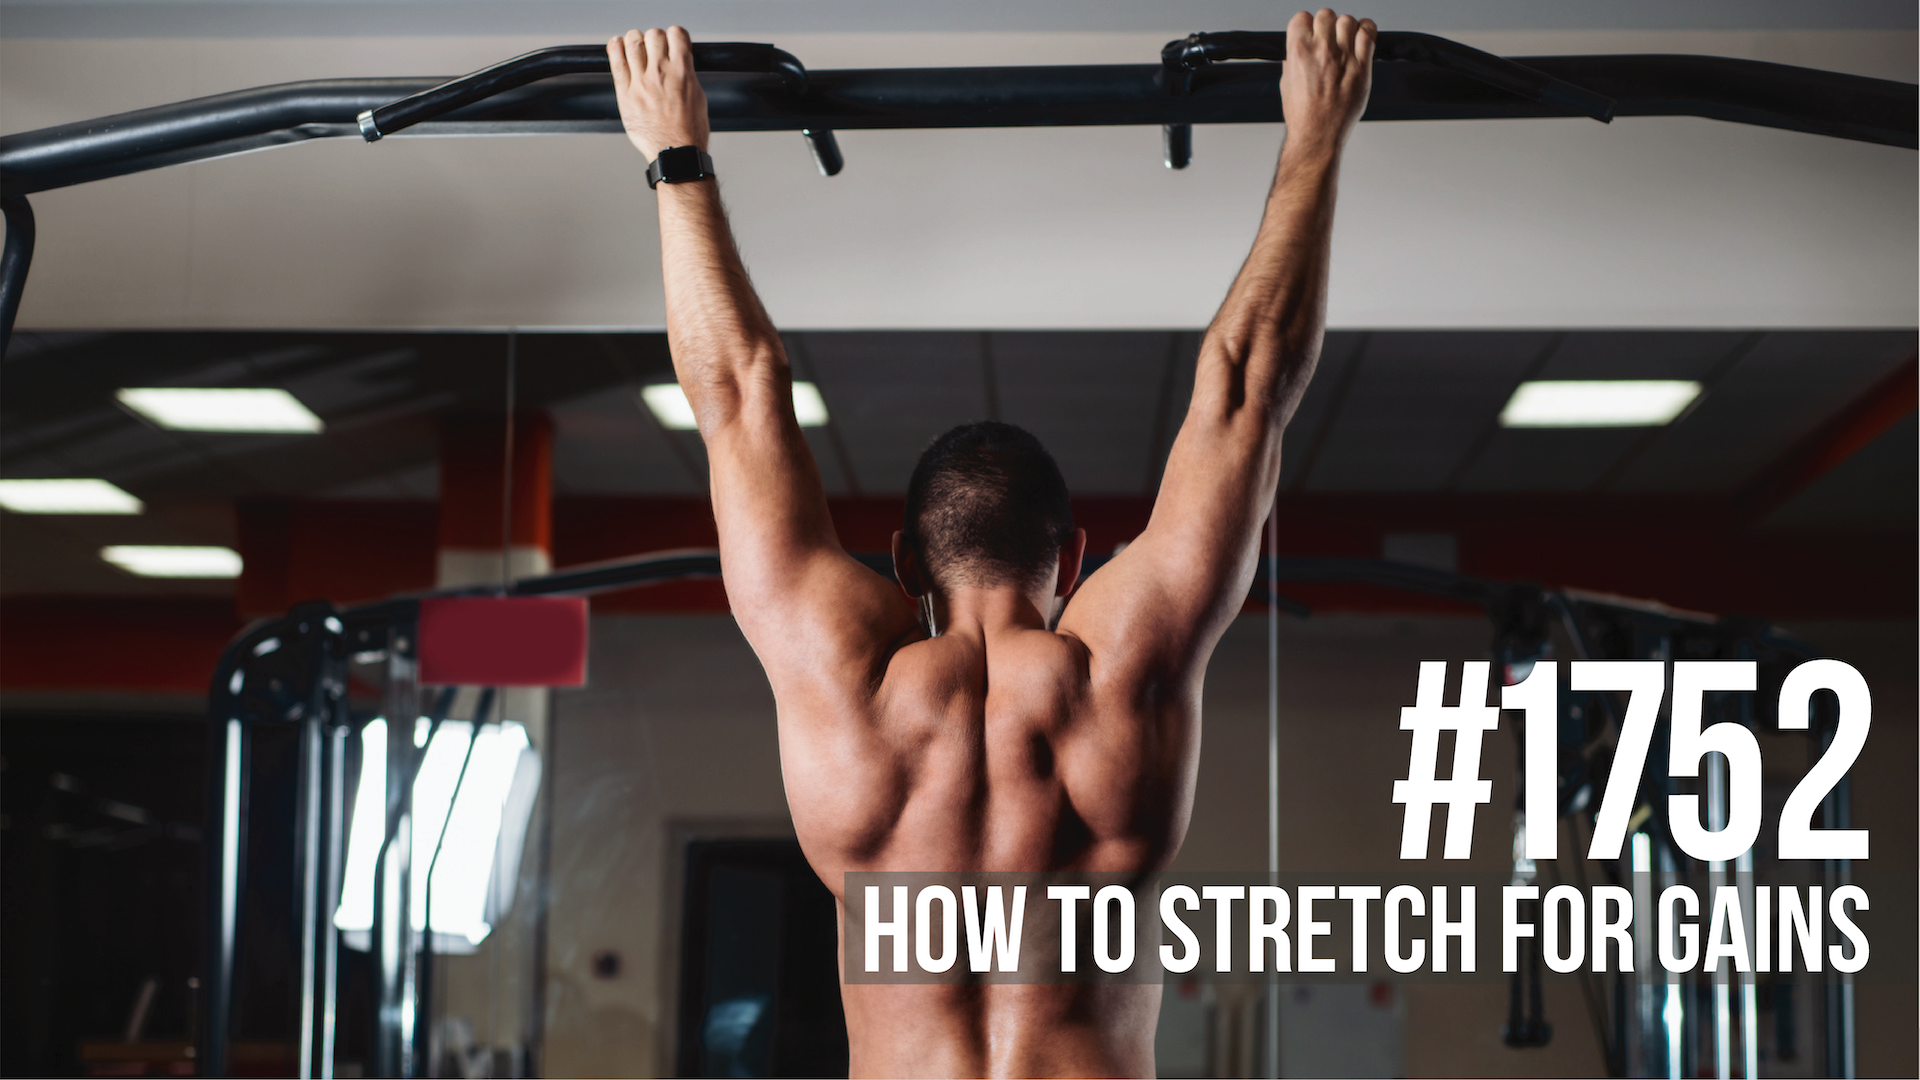 1752: How to Stretch for Gains